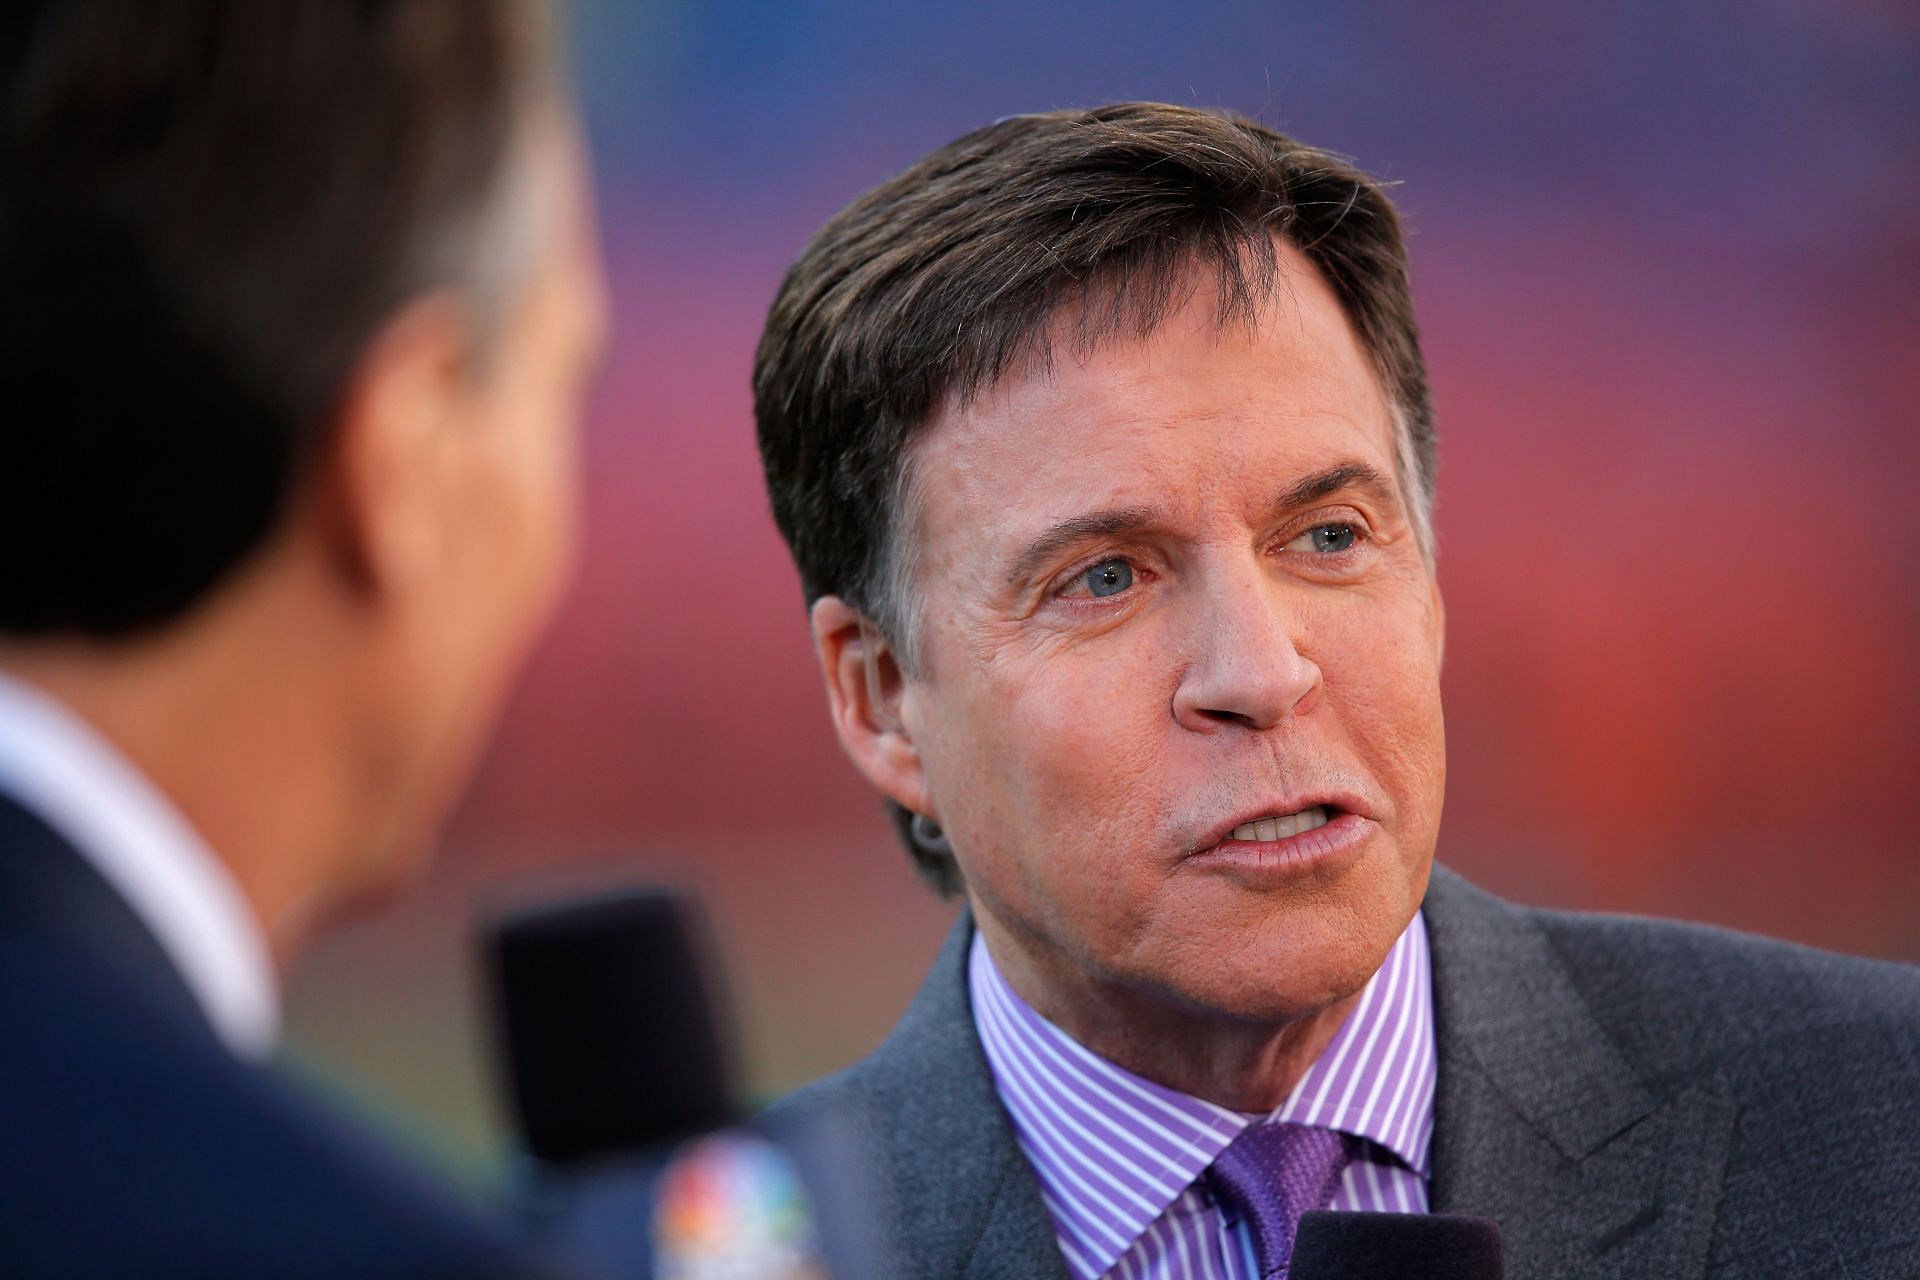 Bob Costas of NBC Sports comentates as the San Francisco 49ers face the Denver Broncos at Sports Authority Field at Mile High on October 19, 2014 in Denver, Colorado.